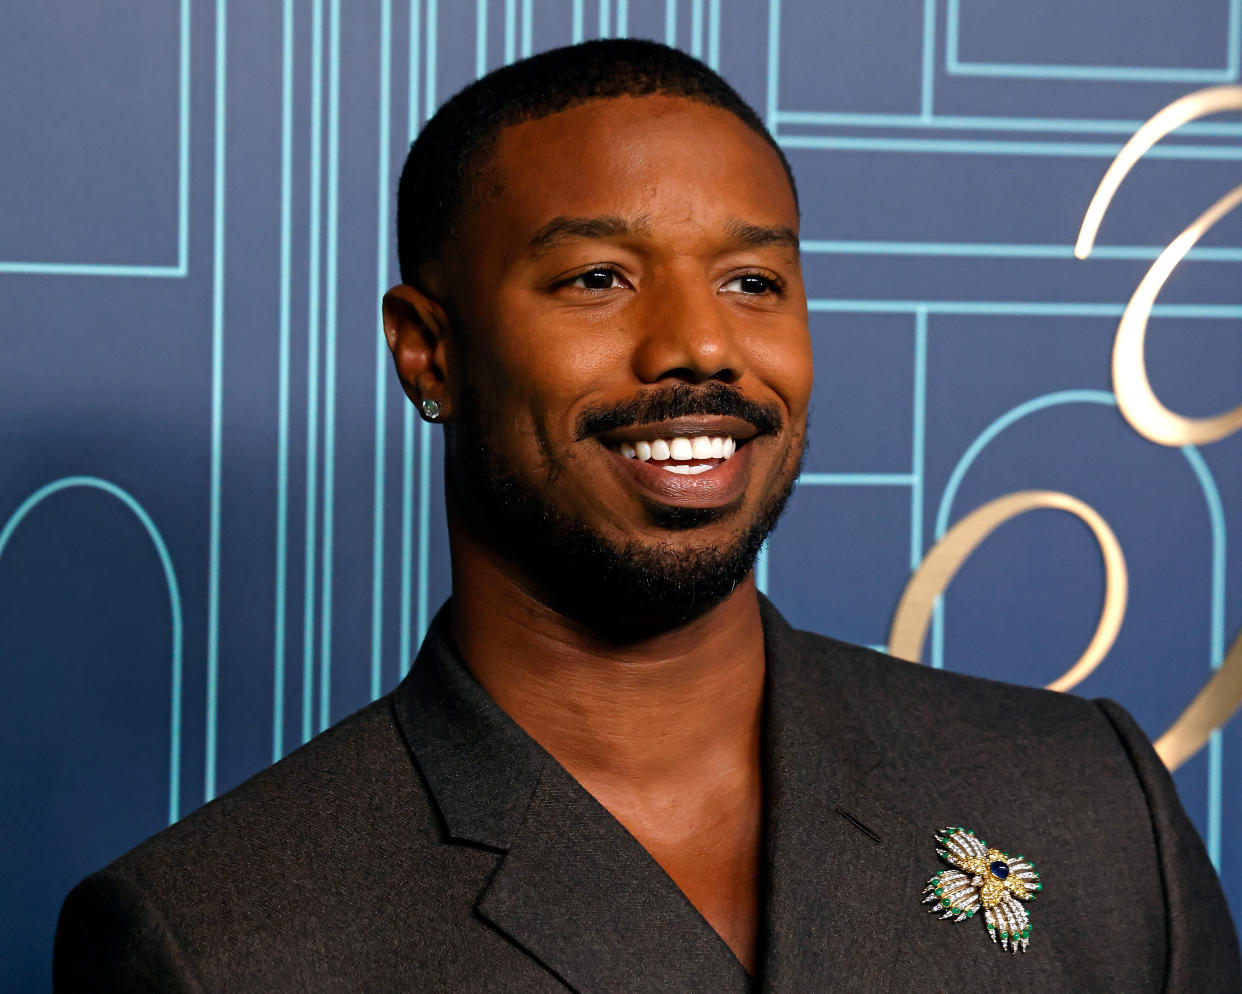 Michael B. Jordan attends the reopening of The Landmark at Tiffany & Co 5th Avenue